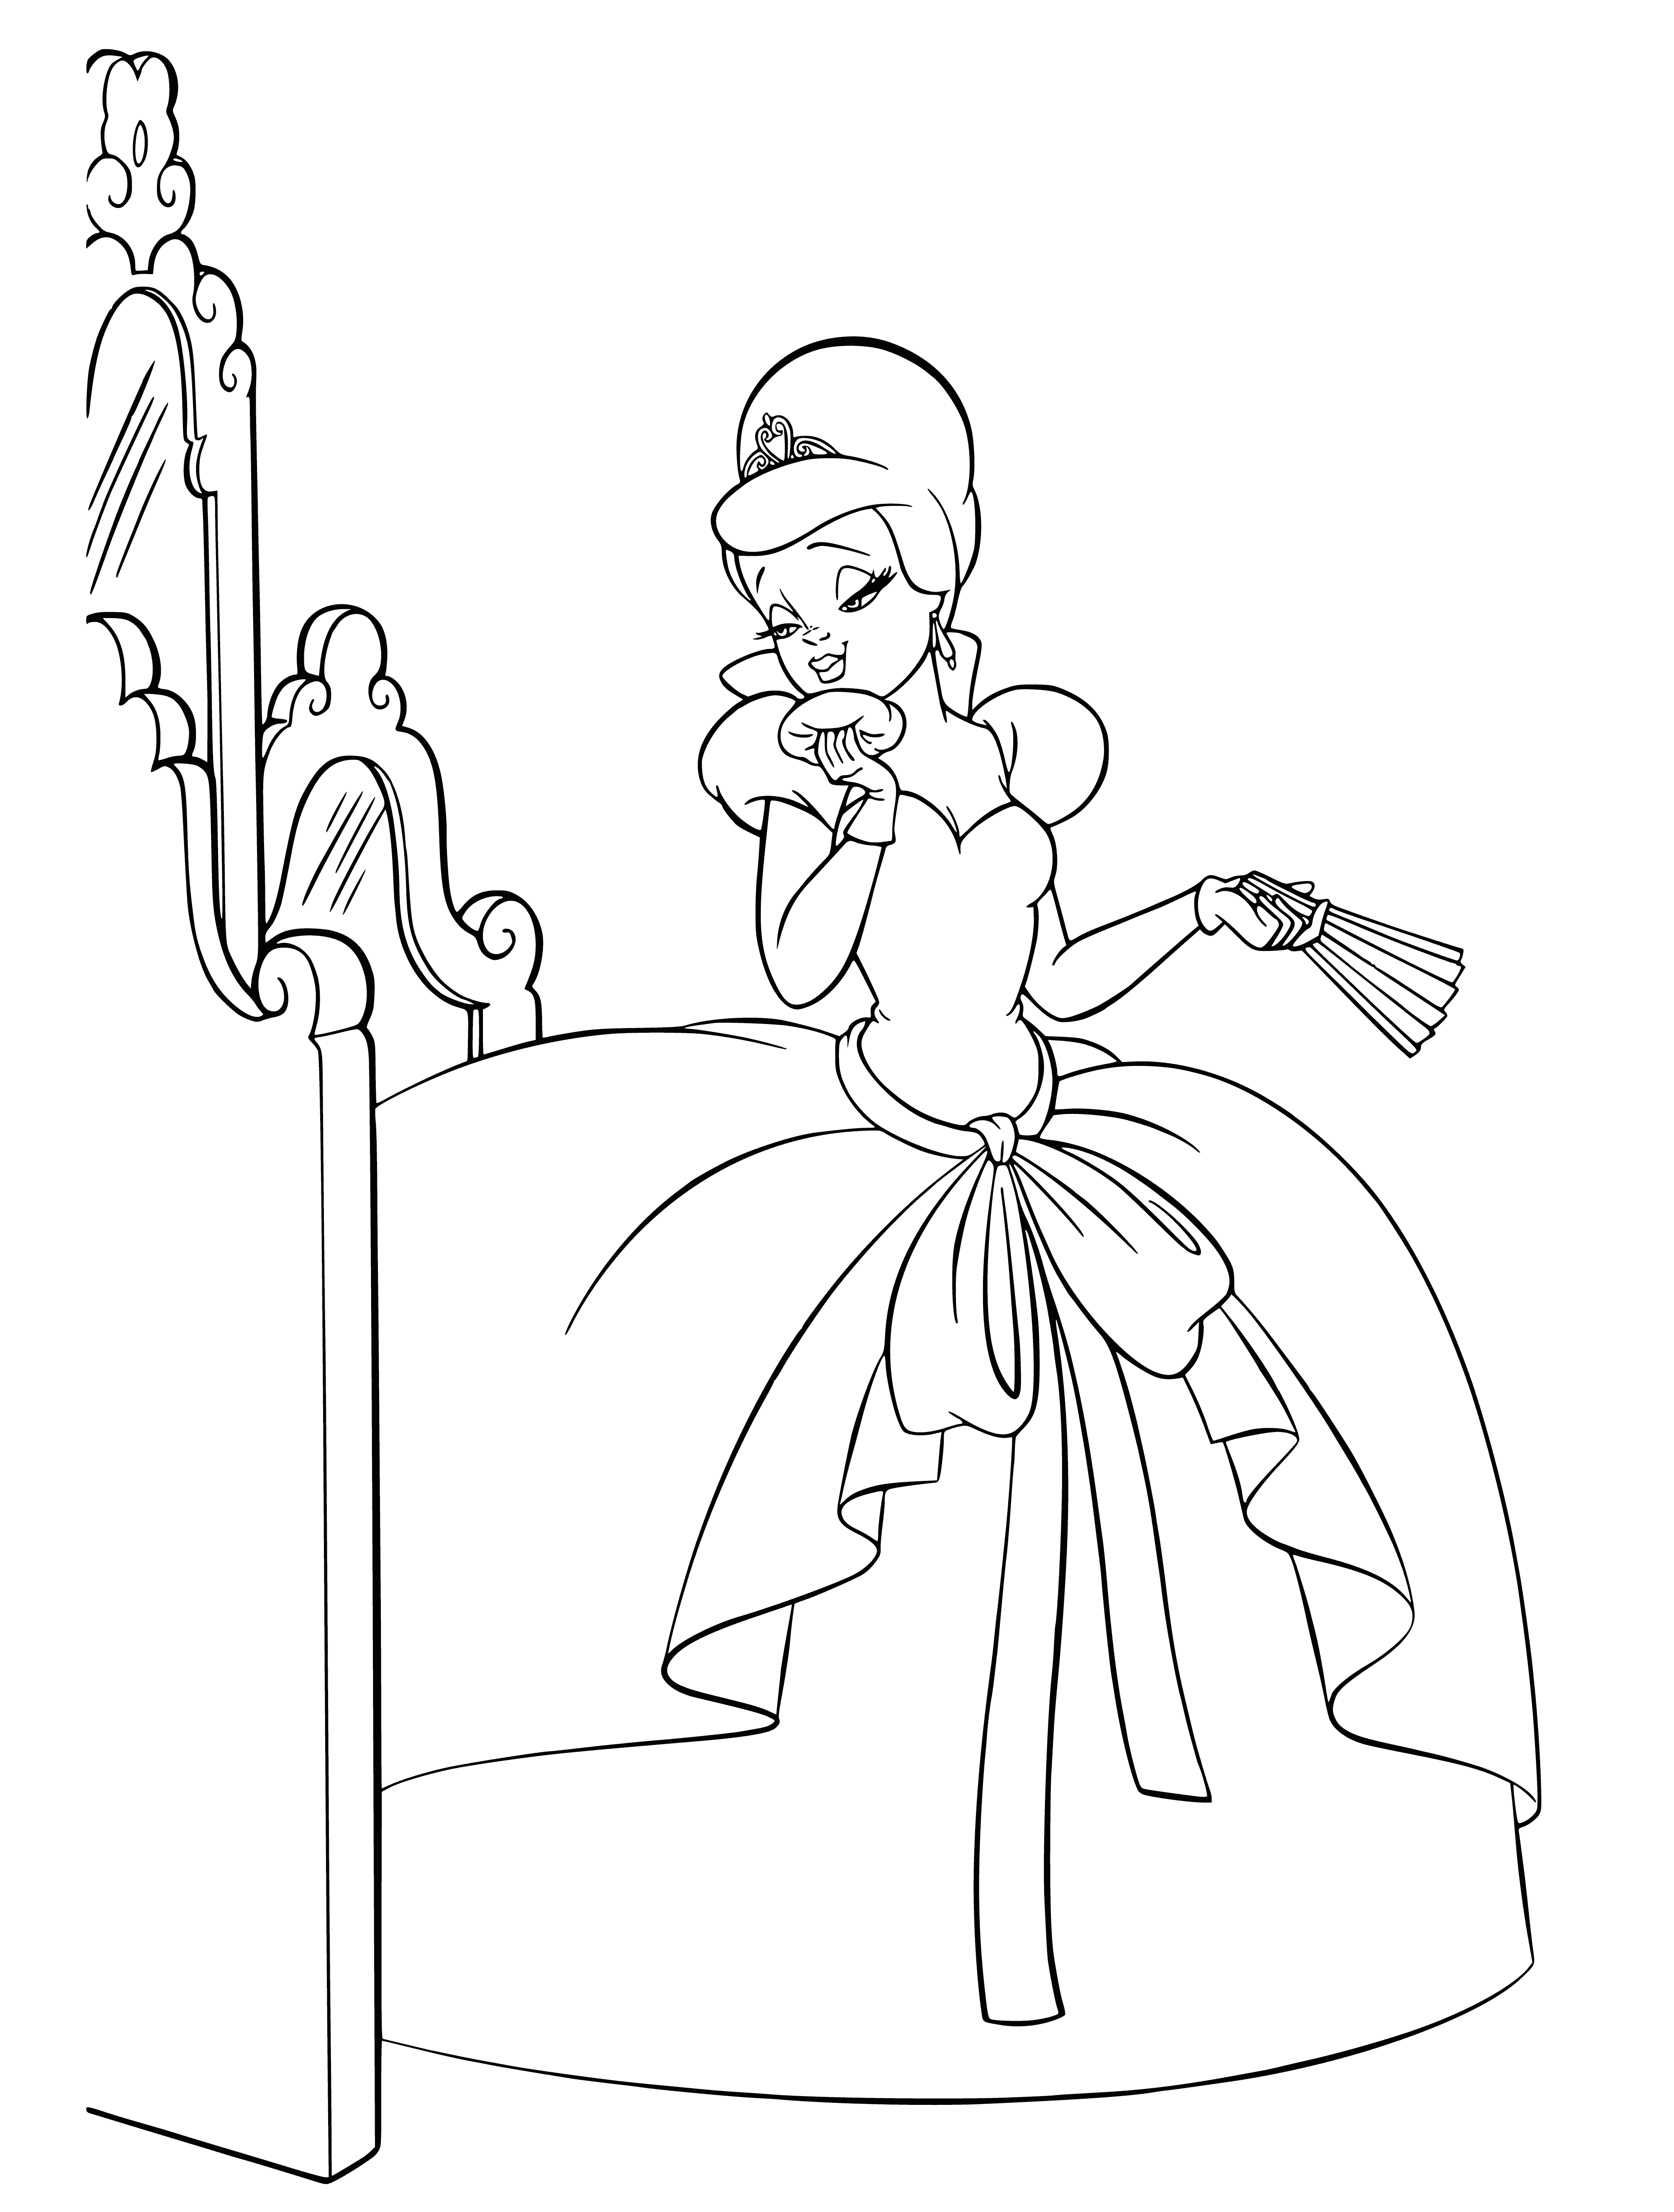 Charlotte is Tiana's friend coloring page